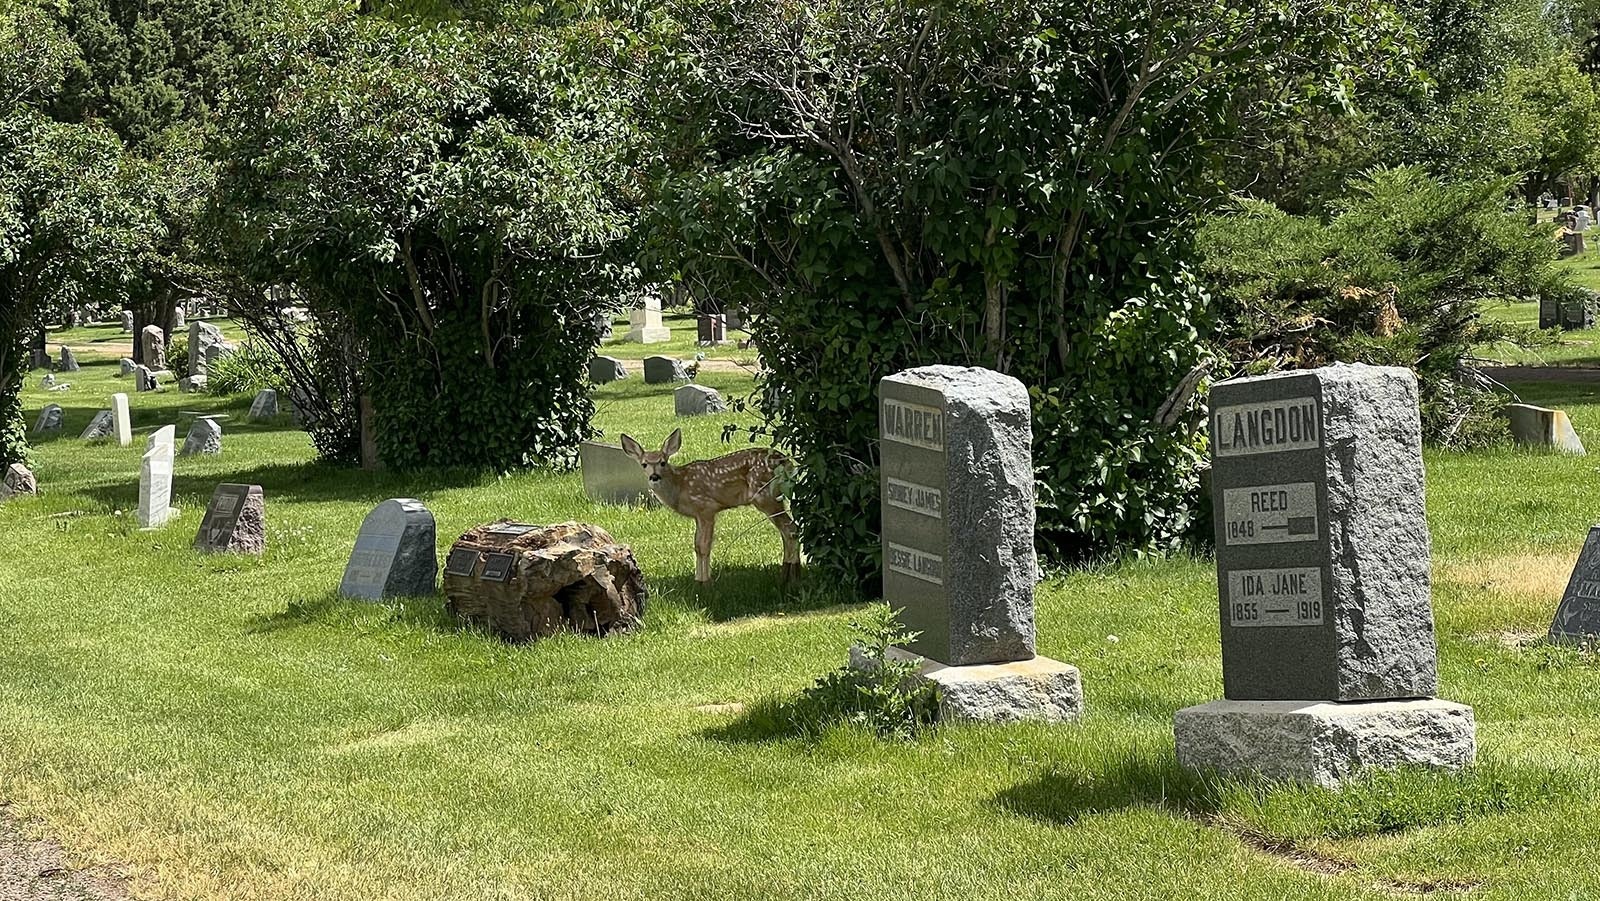 A fawn mule deer pauses just long enough for its photo to be snapped in the Laramie’s Greenhill Cemetery on Thursday. Cemetery staff are warning people not to walk their dogs near the fawn, because its mother hates dogs and will go after them.